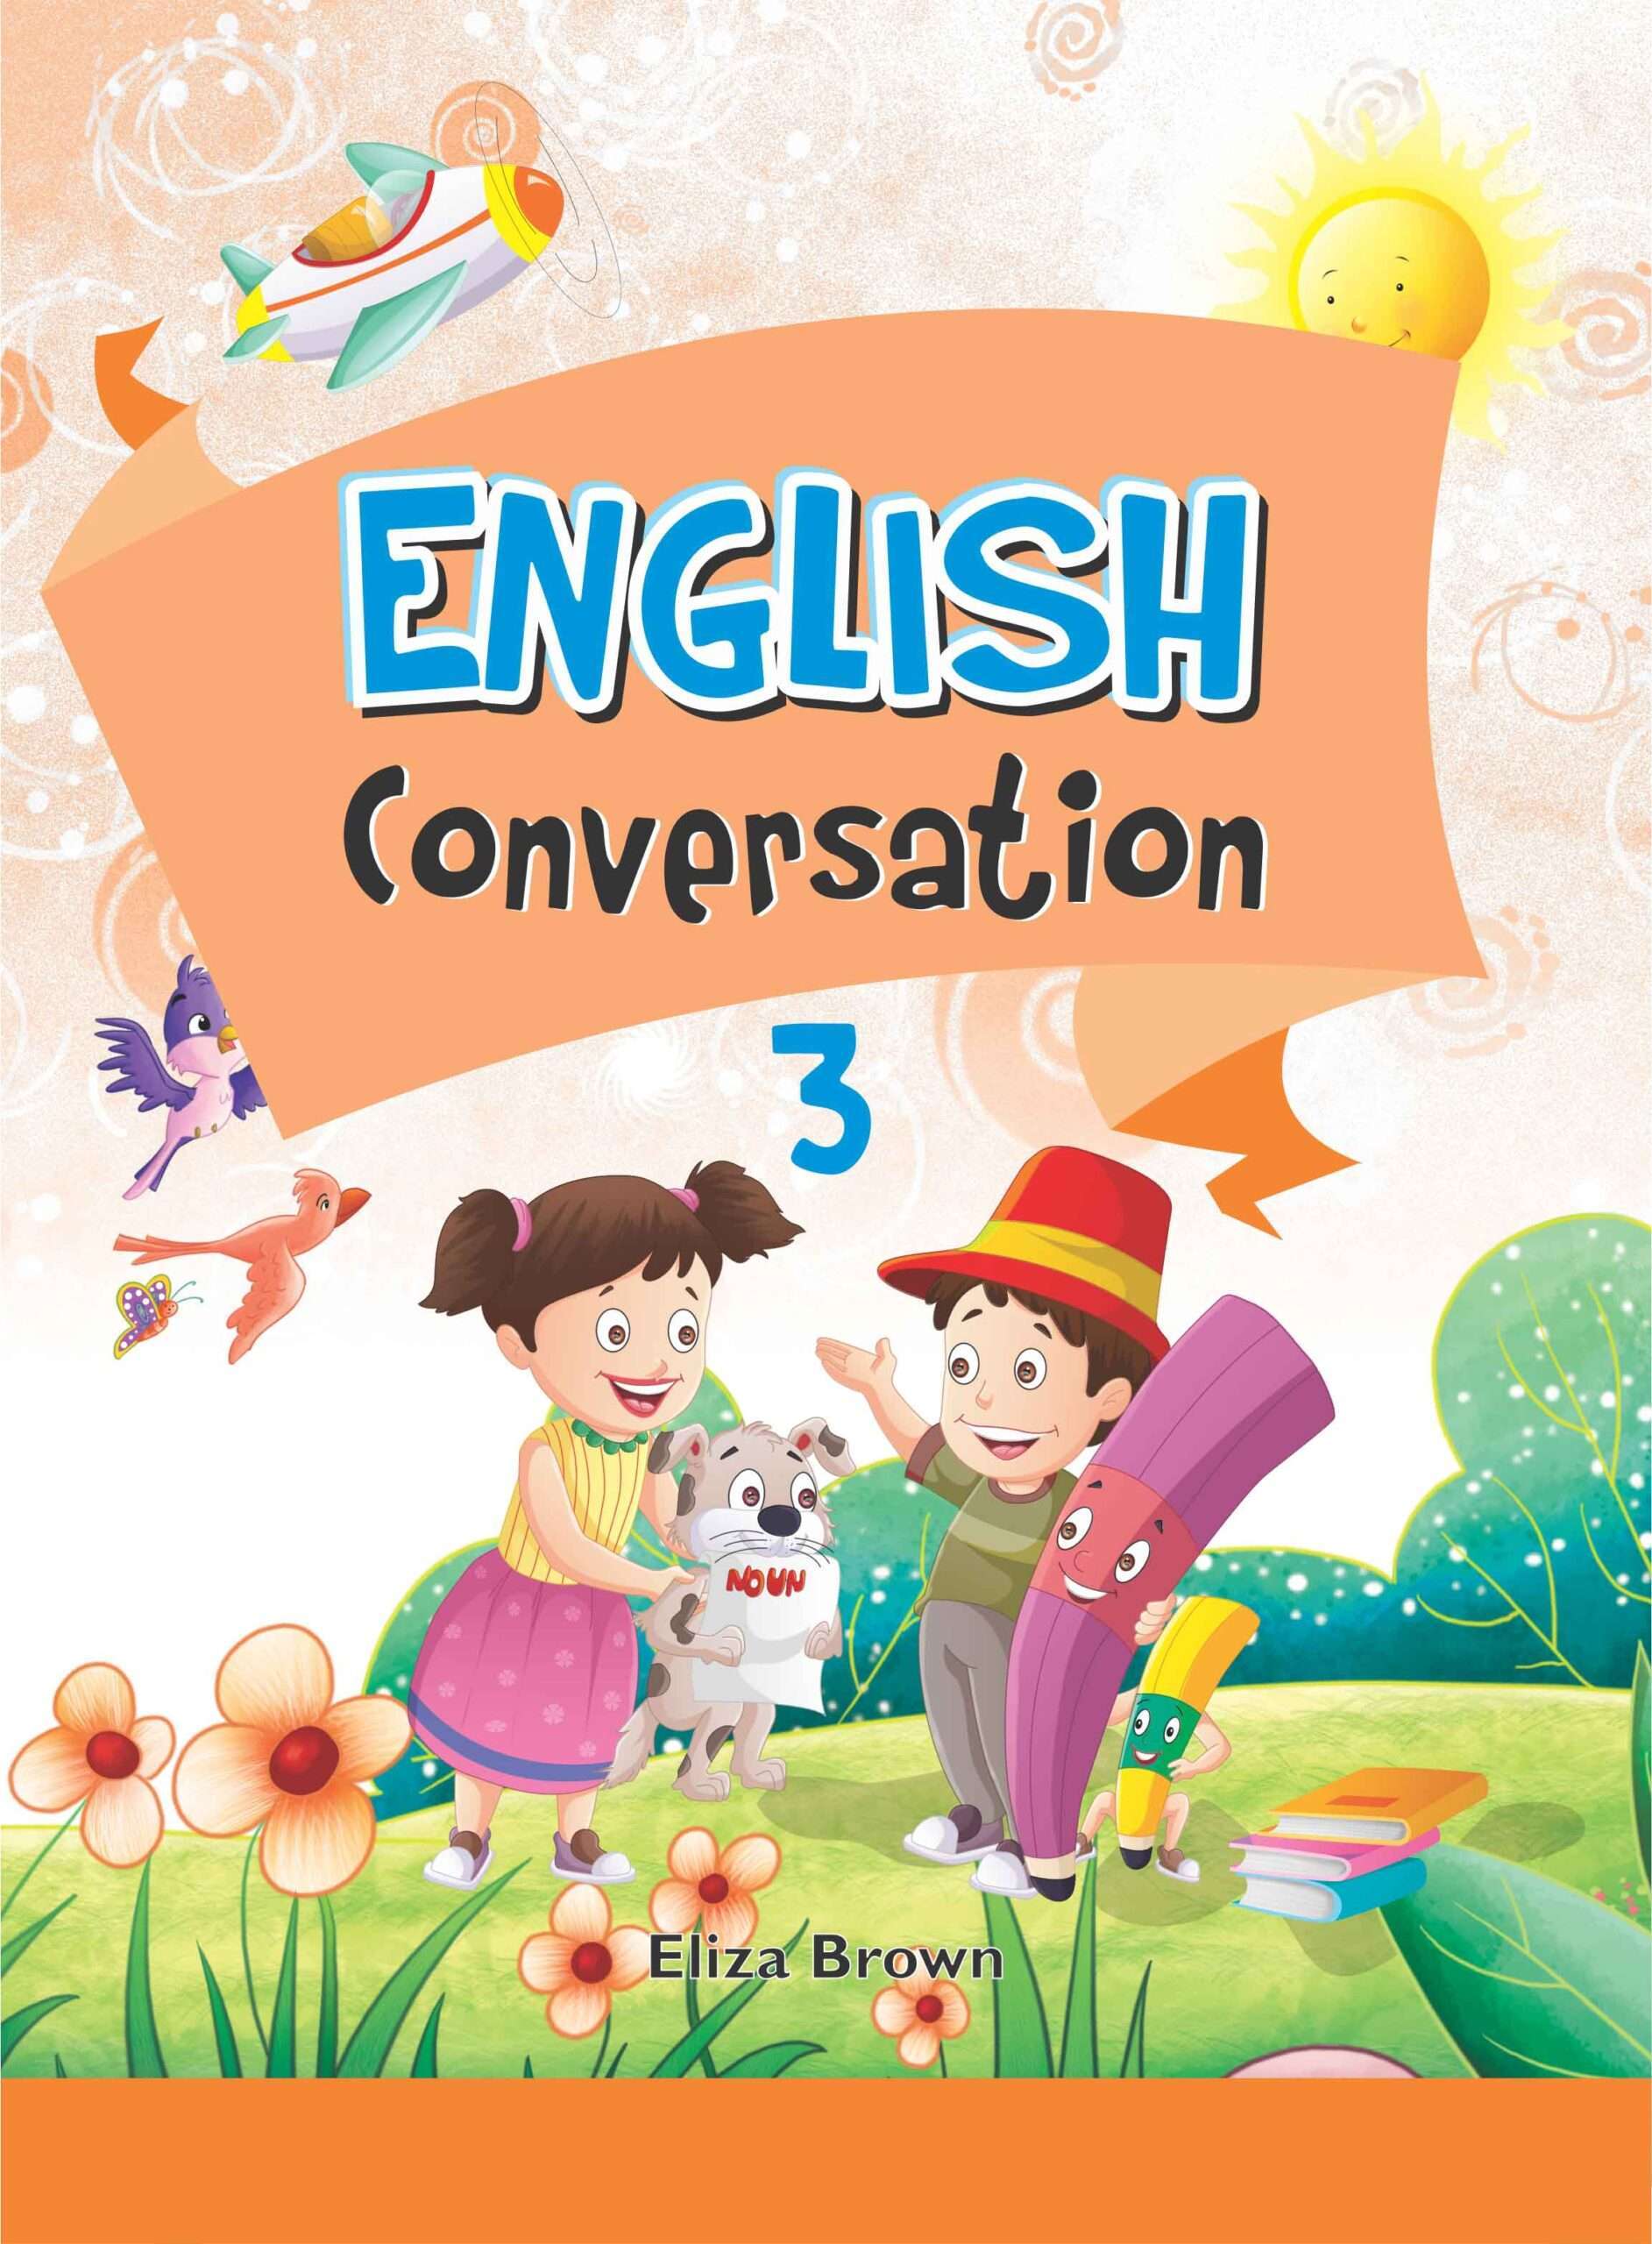 Buy English Conversation for 3